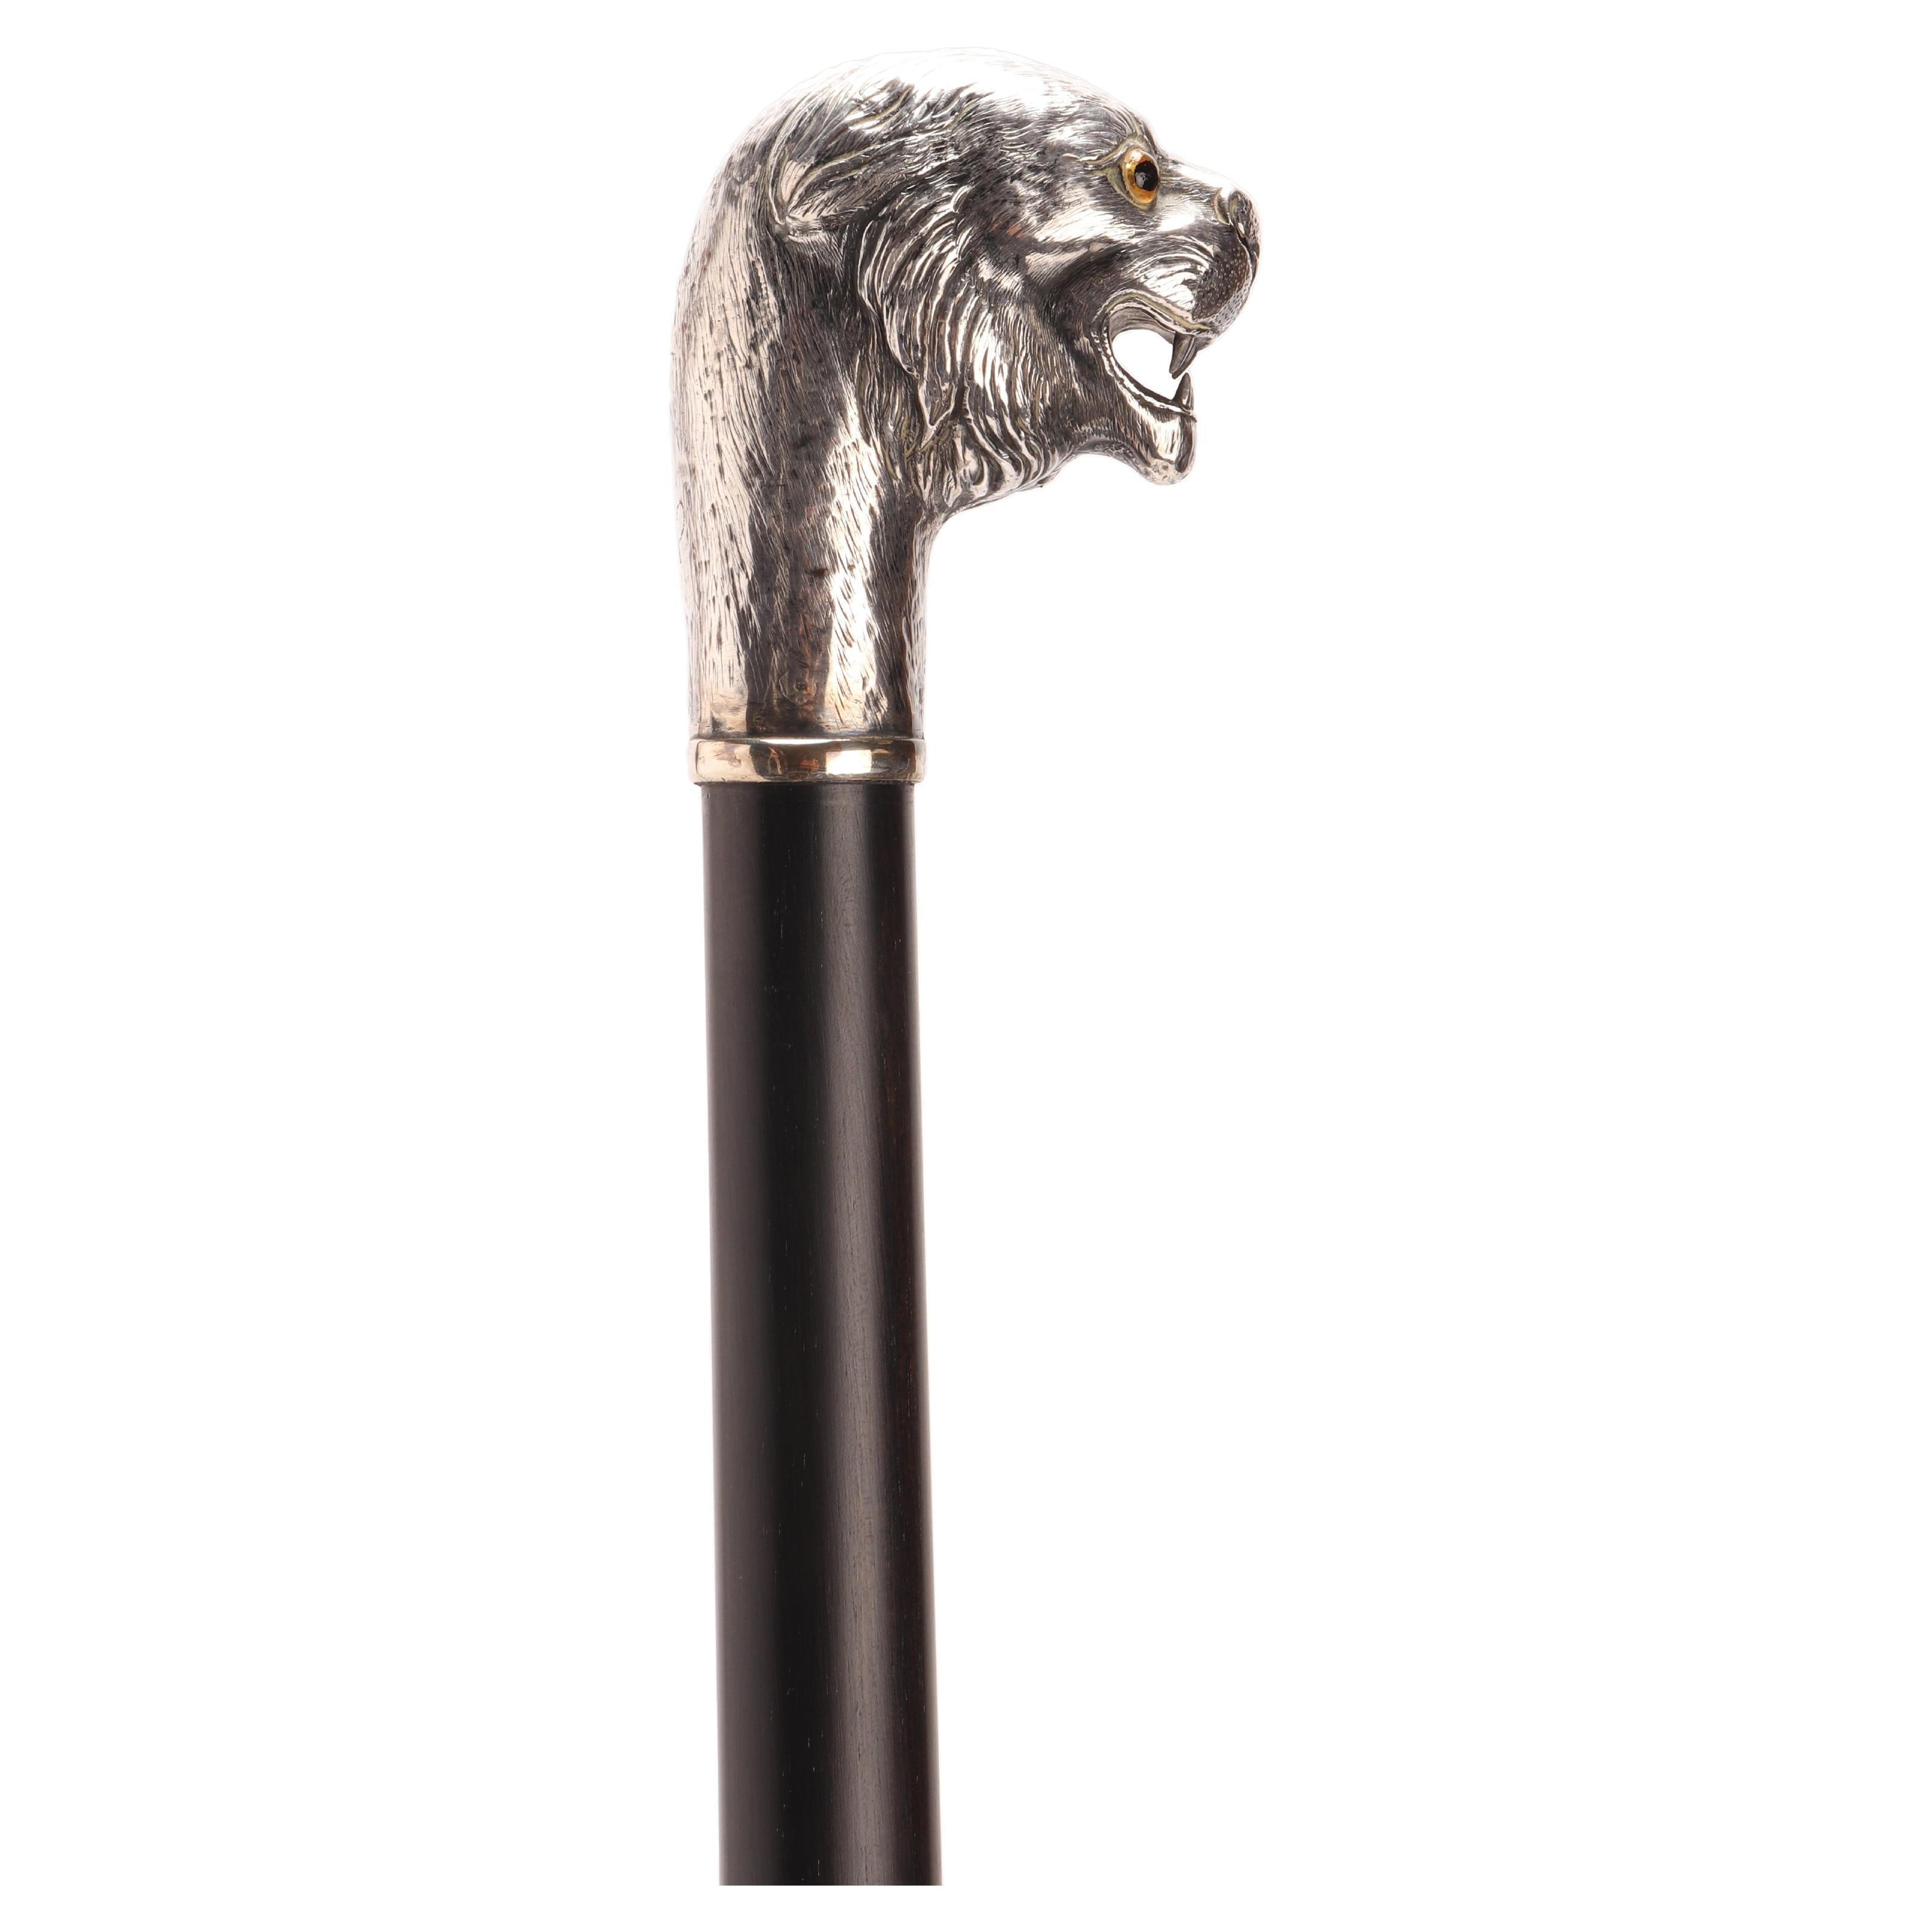 Silver Walking Stick with a Lion, London, 1900